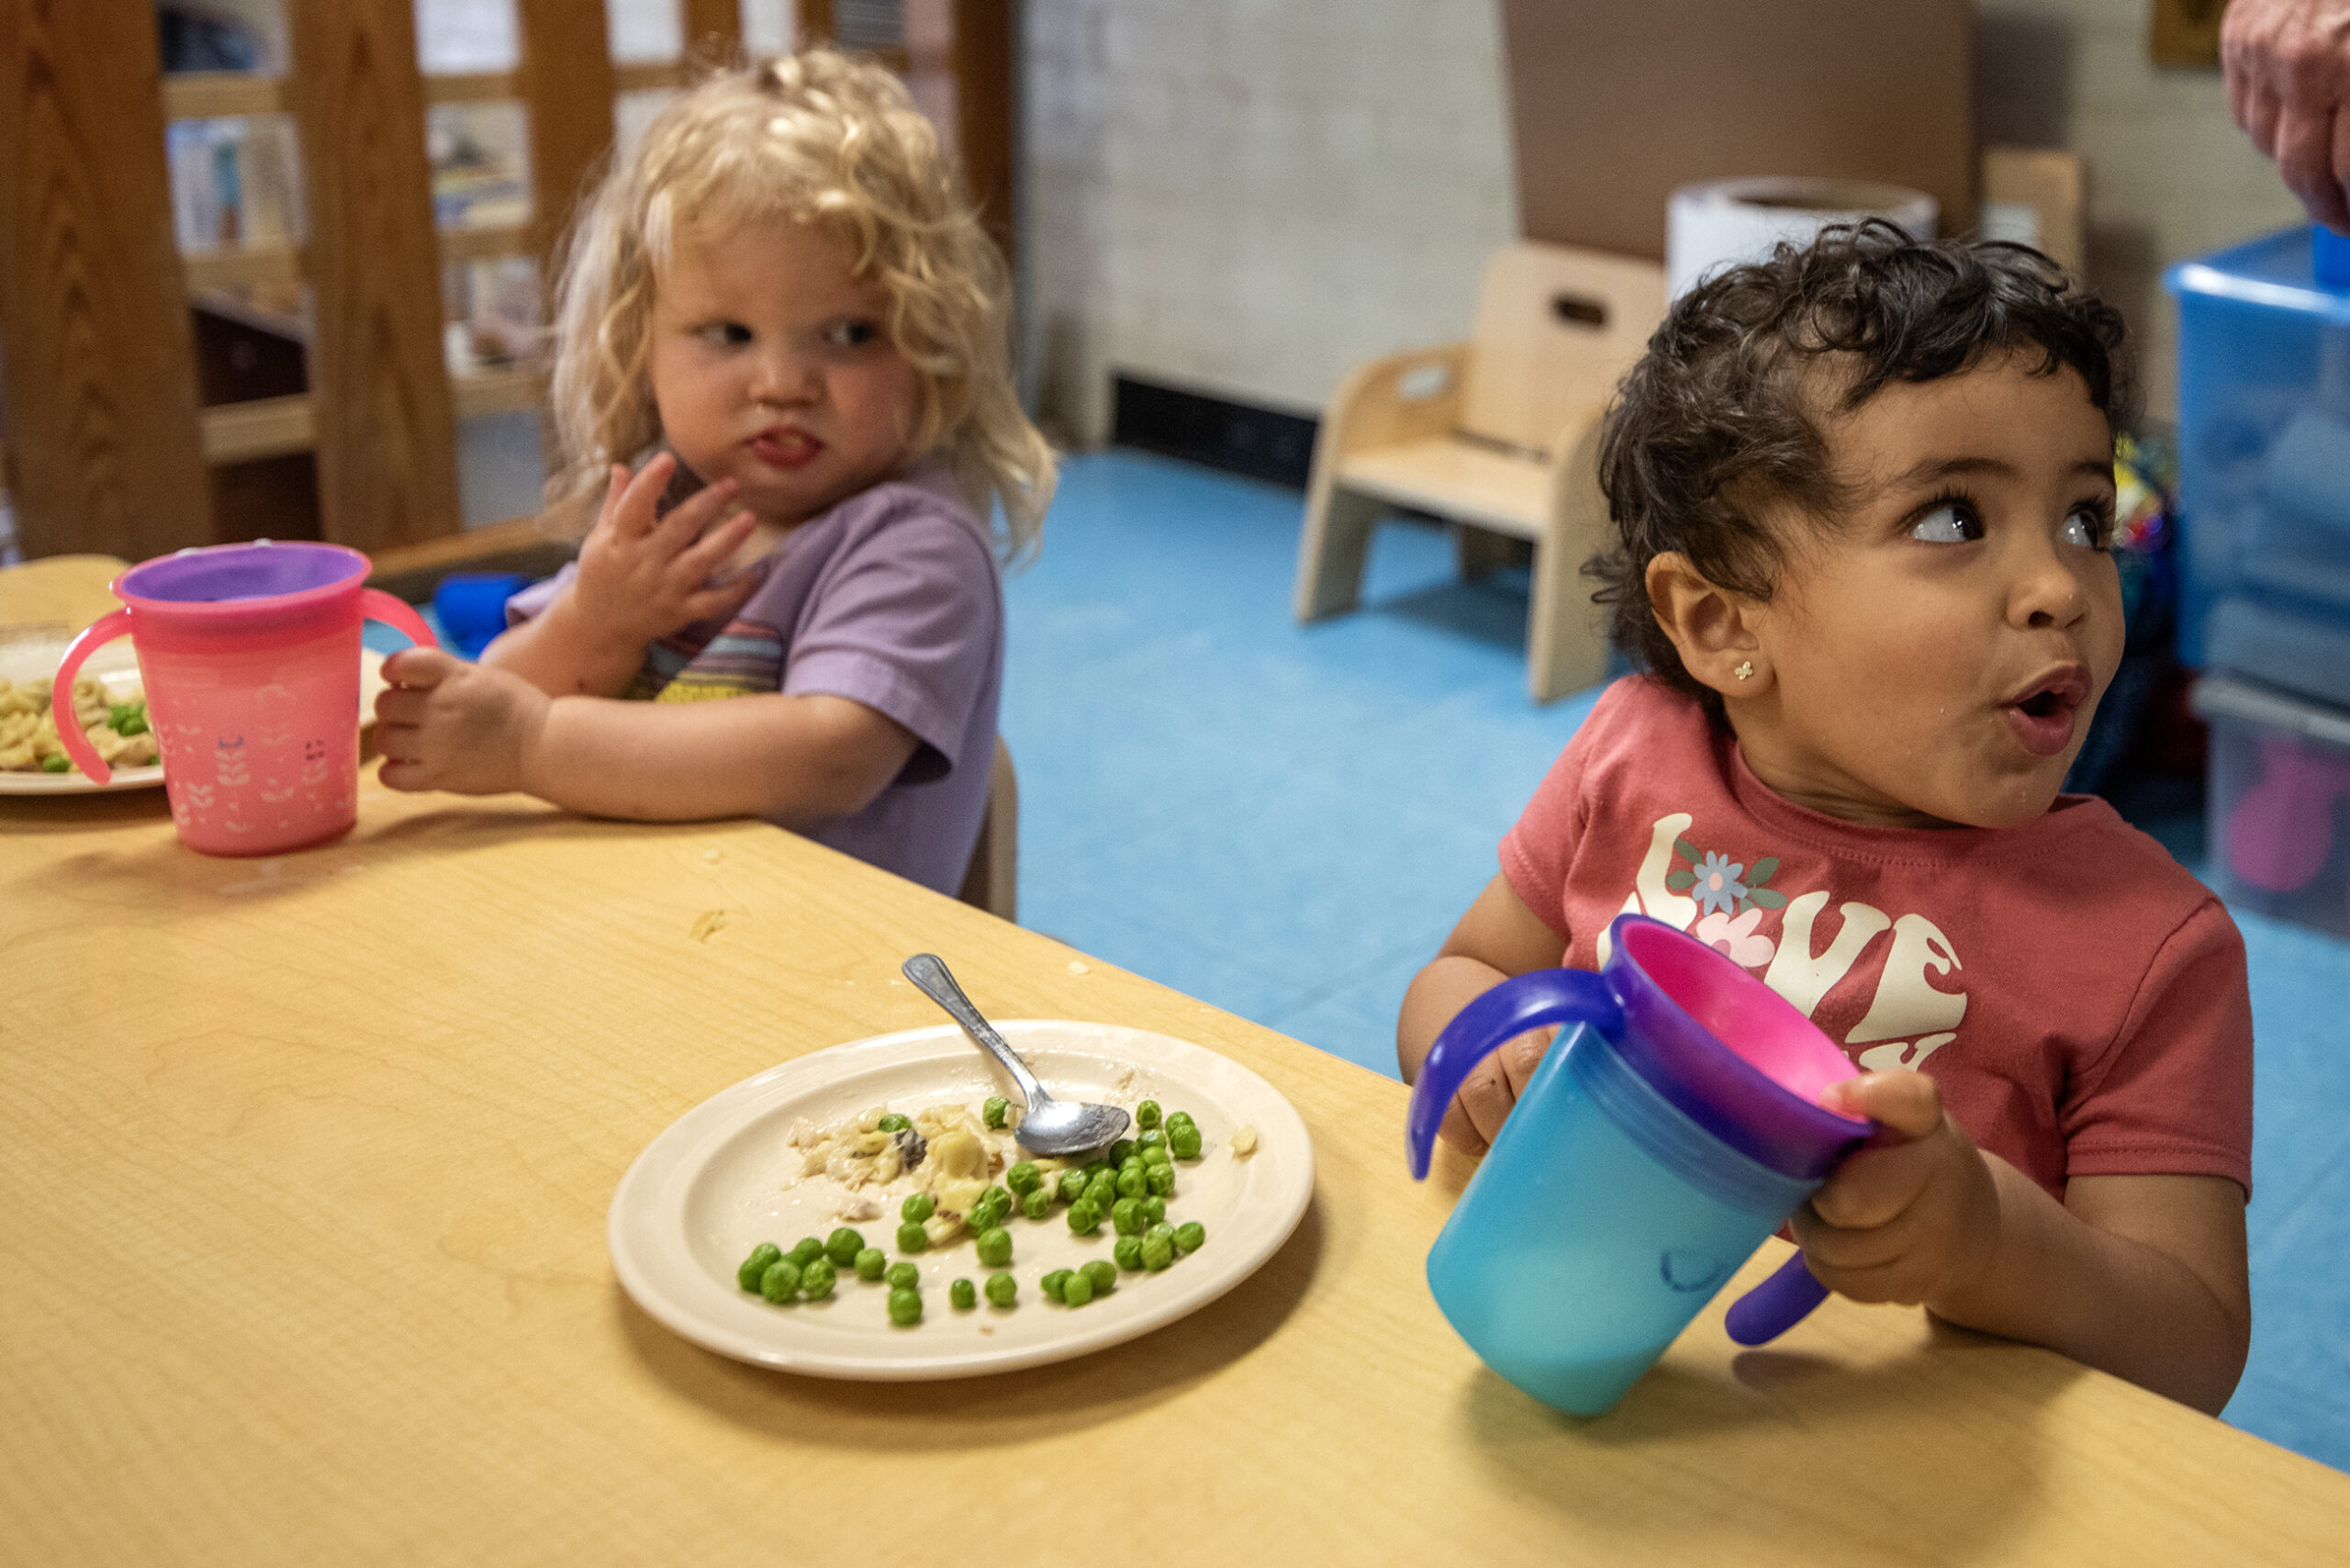 Two children eat lunch at a table.